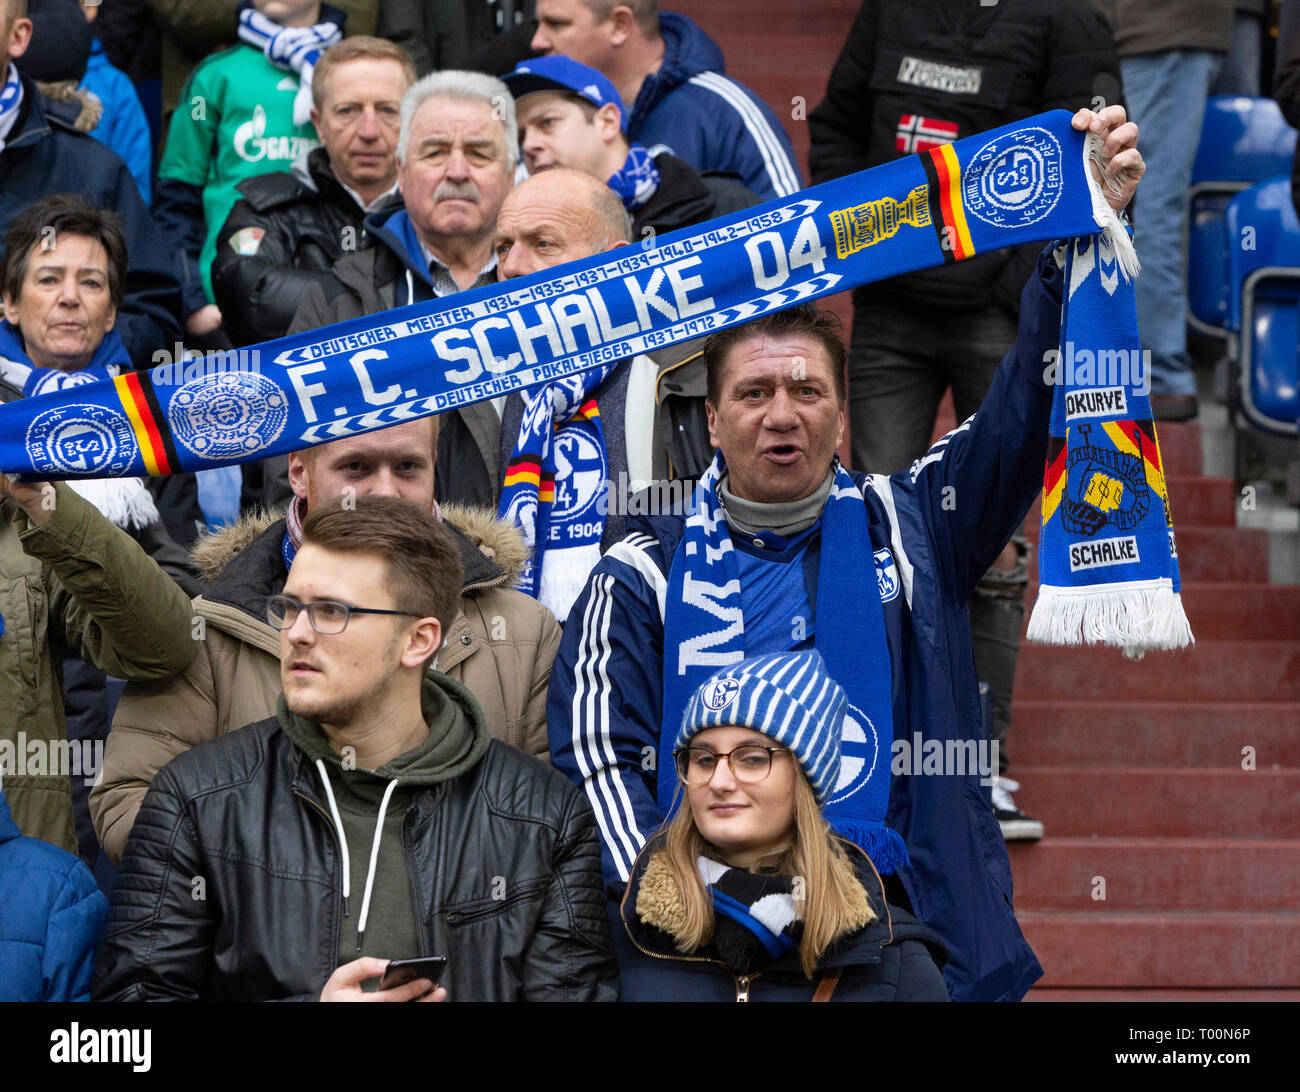 Schalke 04 Fans High Resolution Stock Photography and Images - Alamy